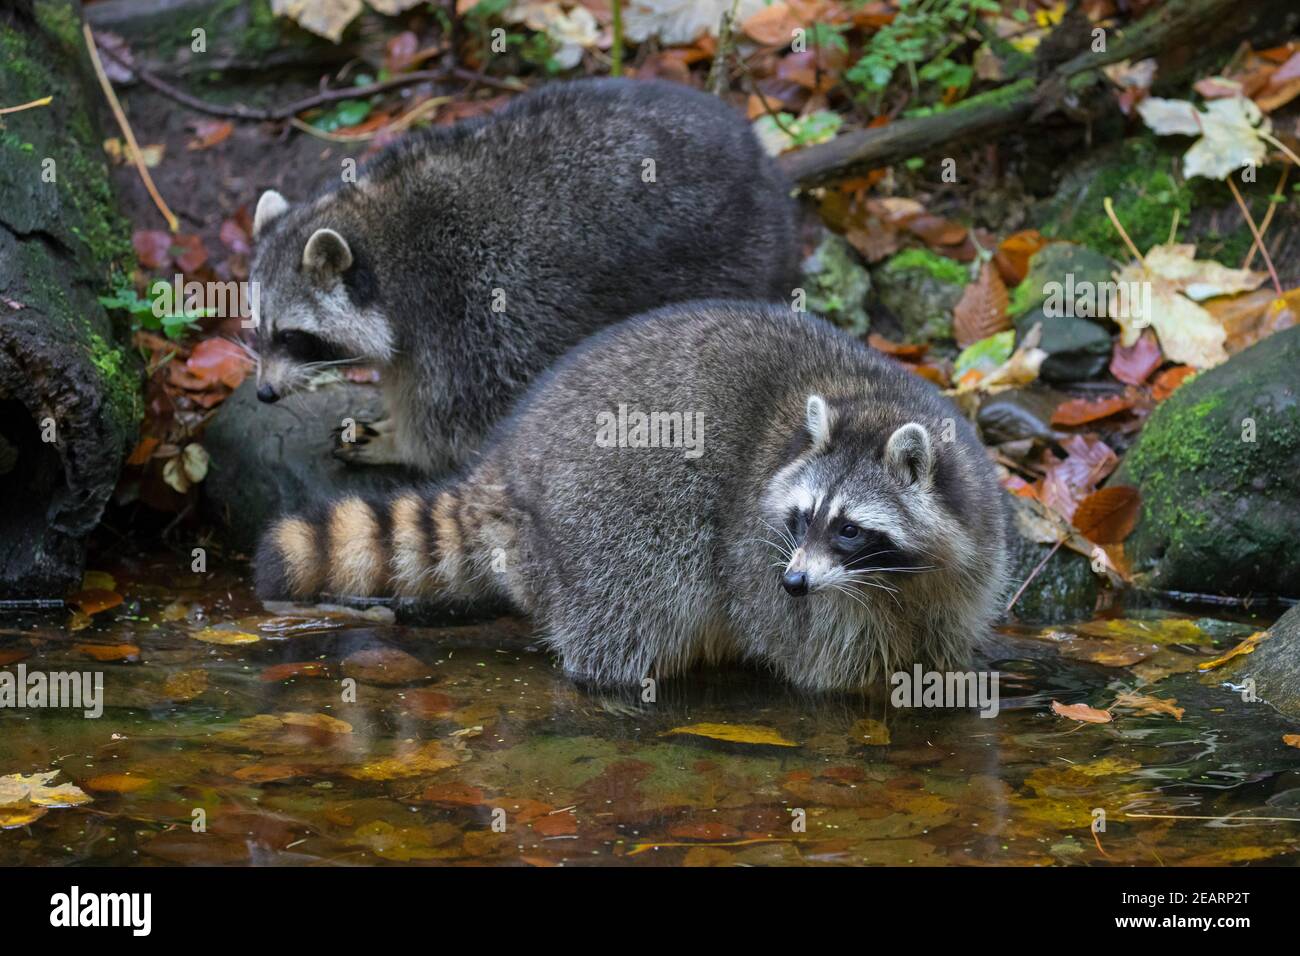 Two raccoons (Procyon lotor), invasive species native to North America, washing food in water from brook / stream Stock Photo